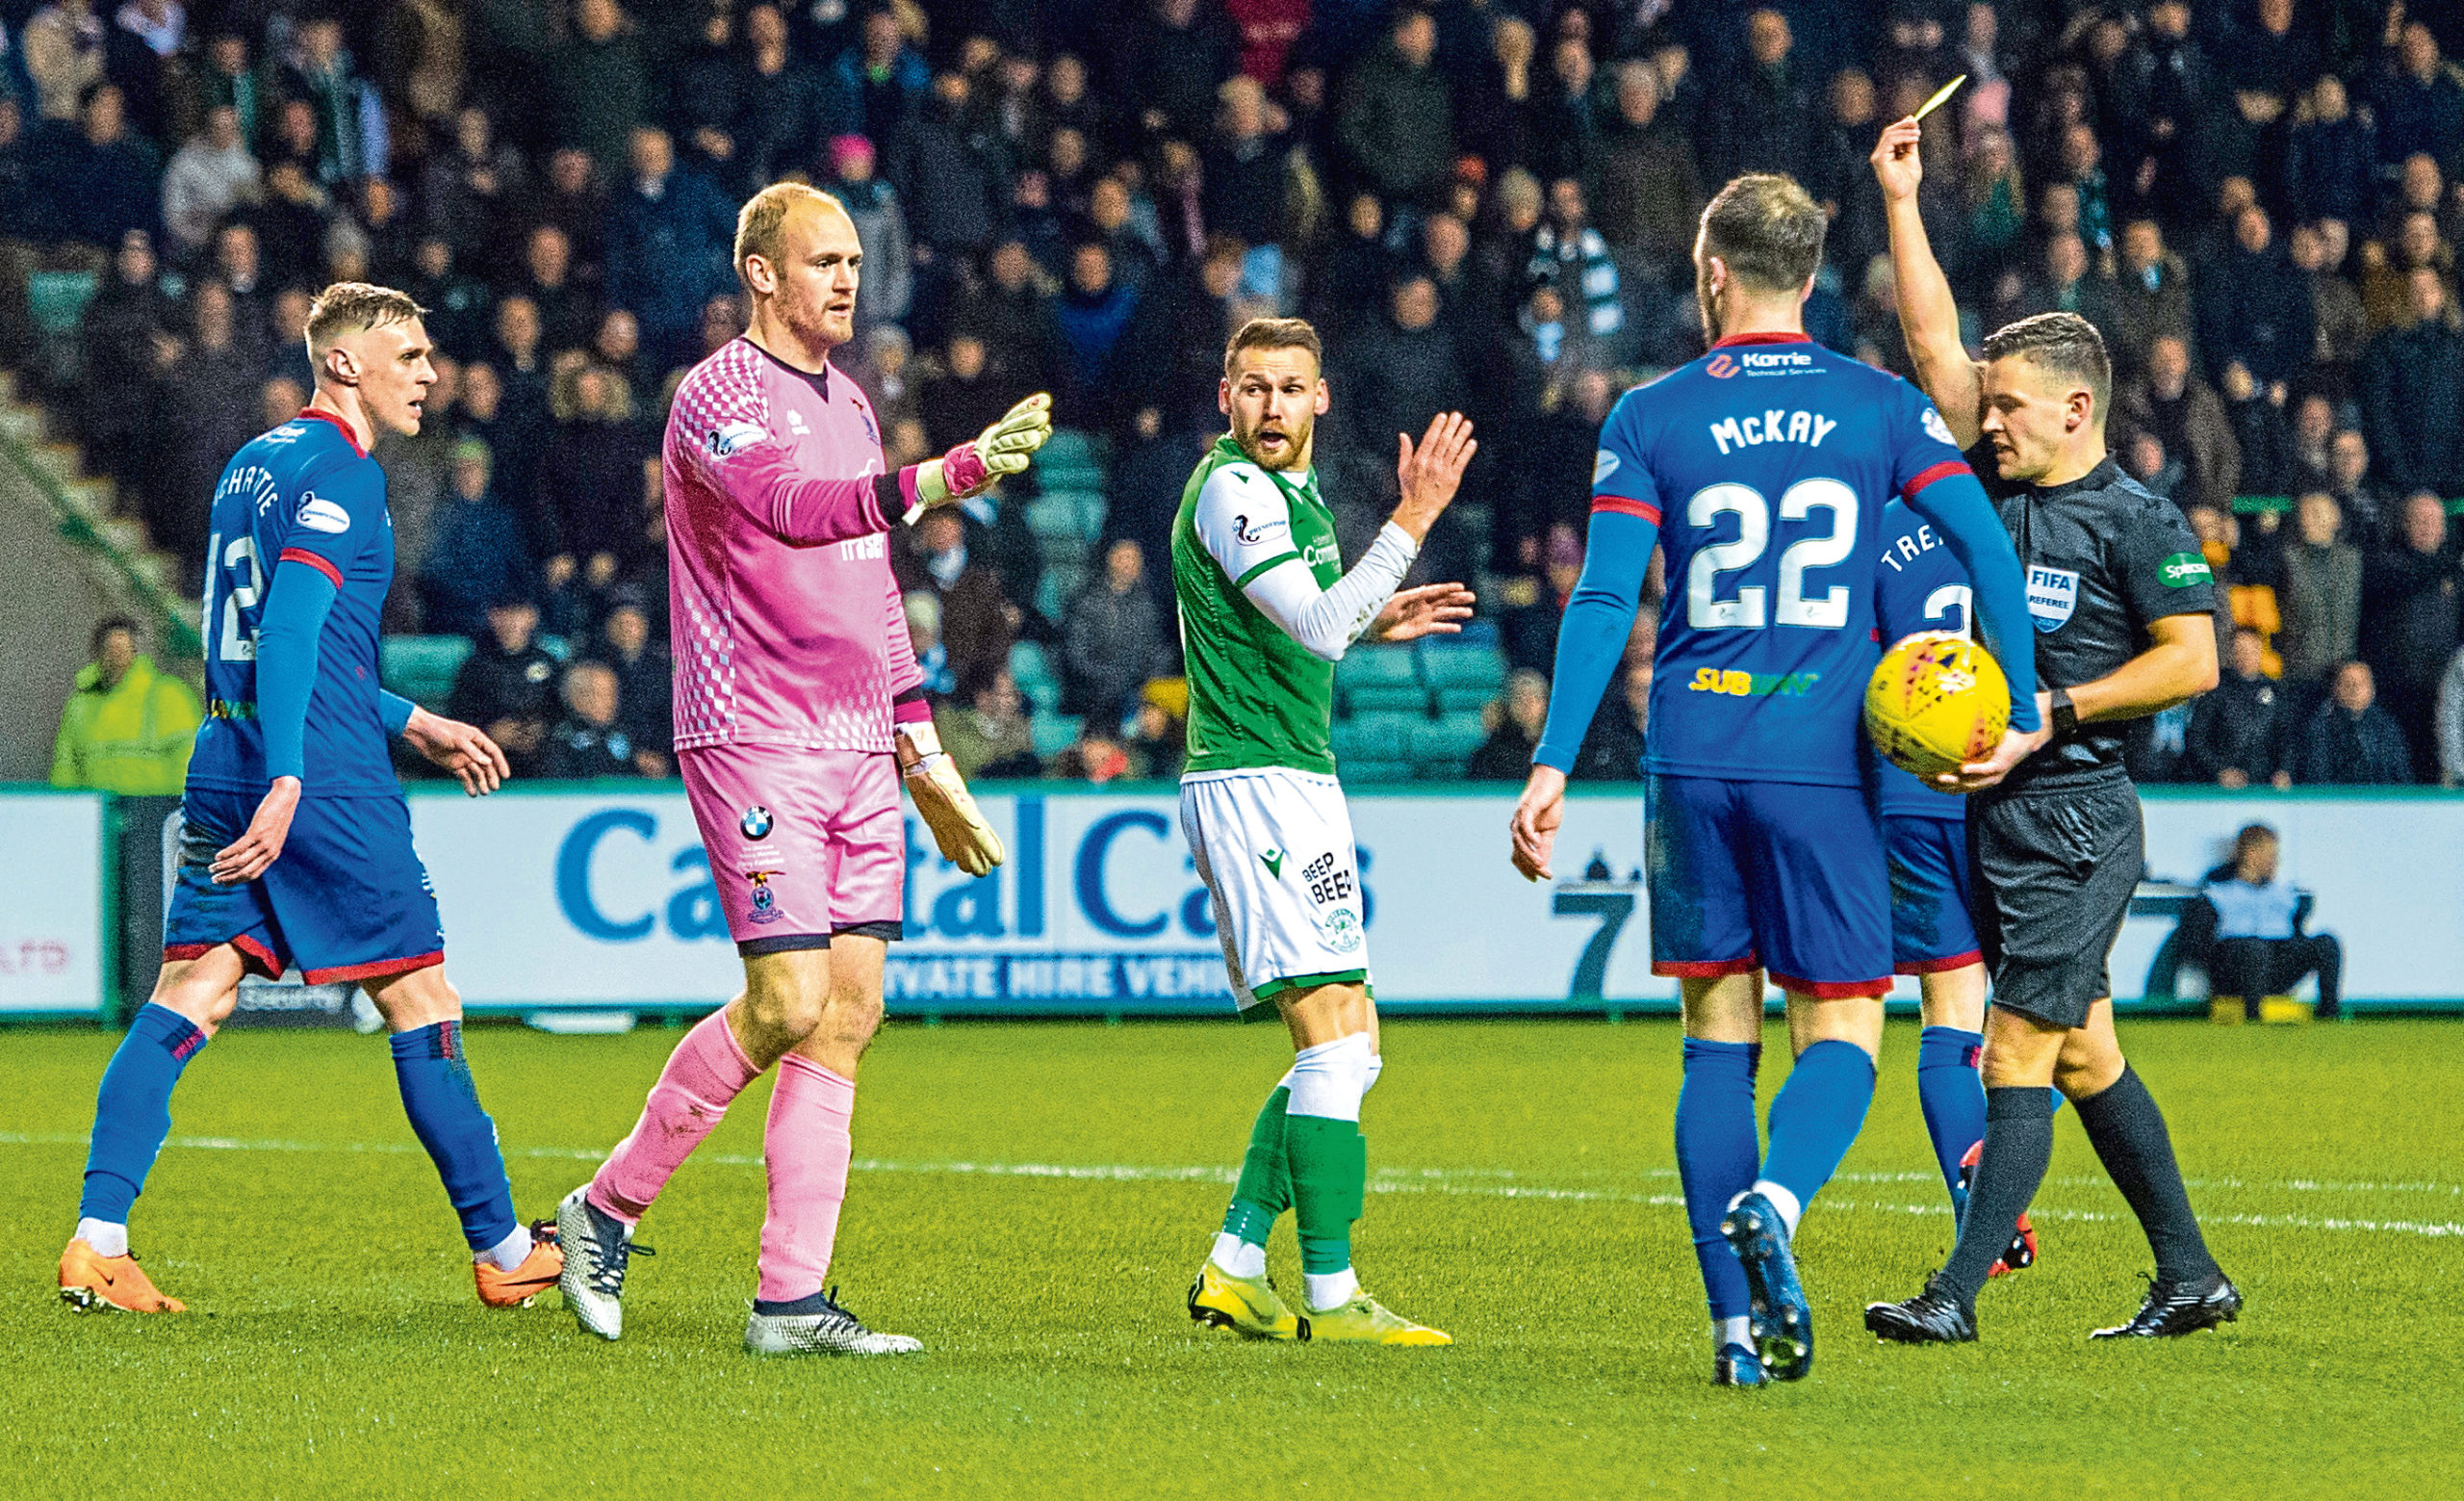 Martin Boyle goes down in the box under challenge from Mark Ridgers and is subsequently yellow carded for simulation during the William Hill Scottish Cup quarter-final.